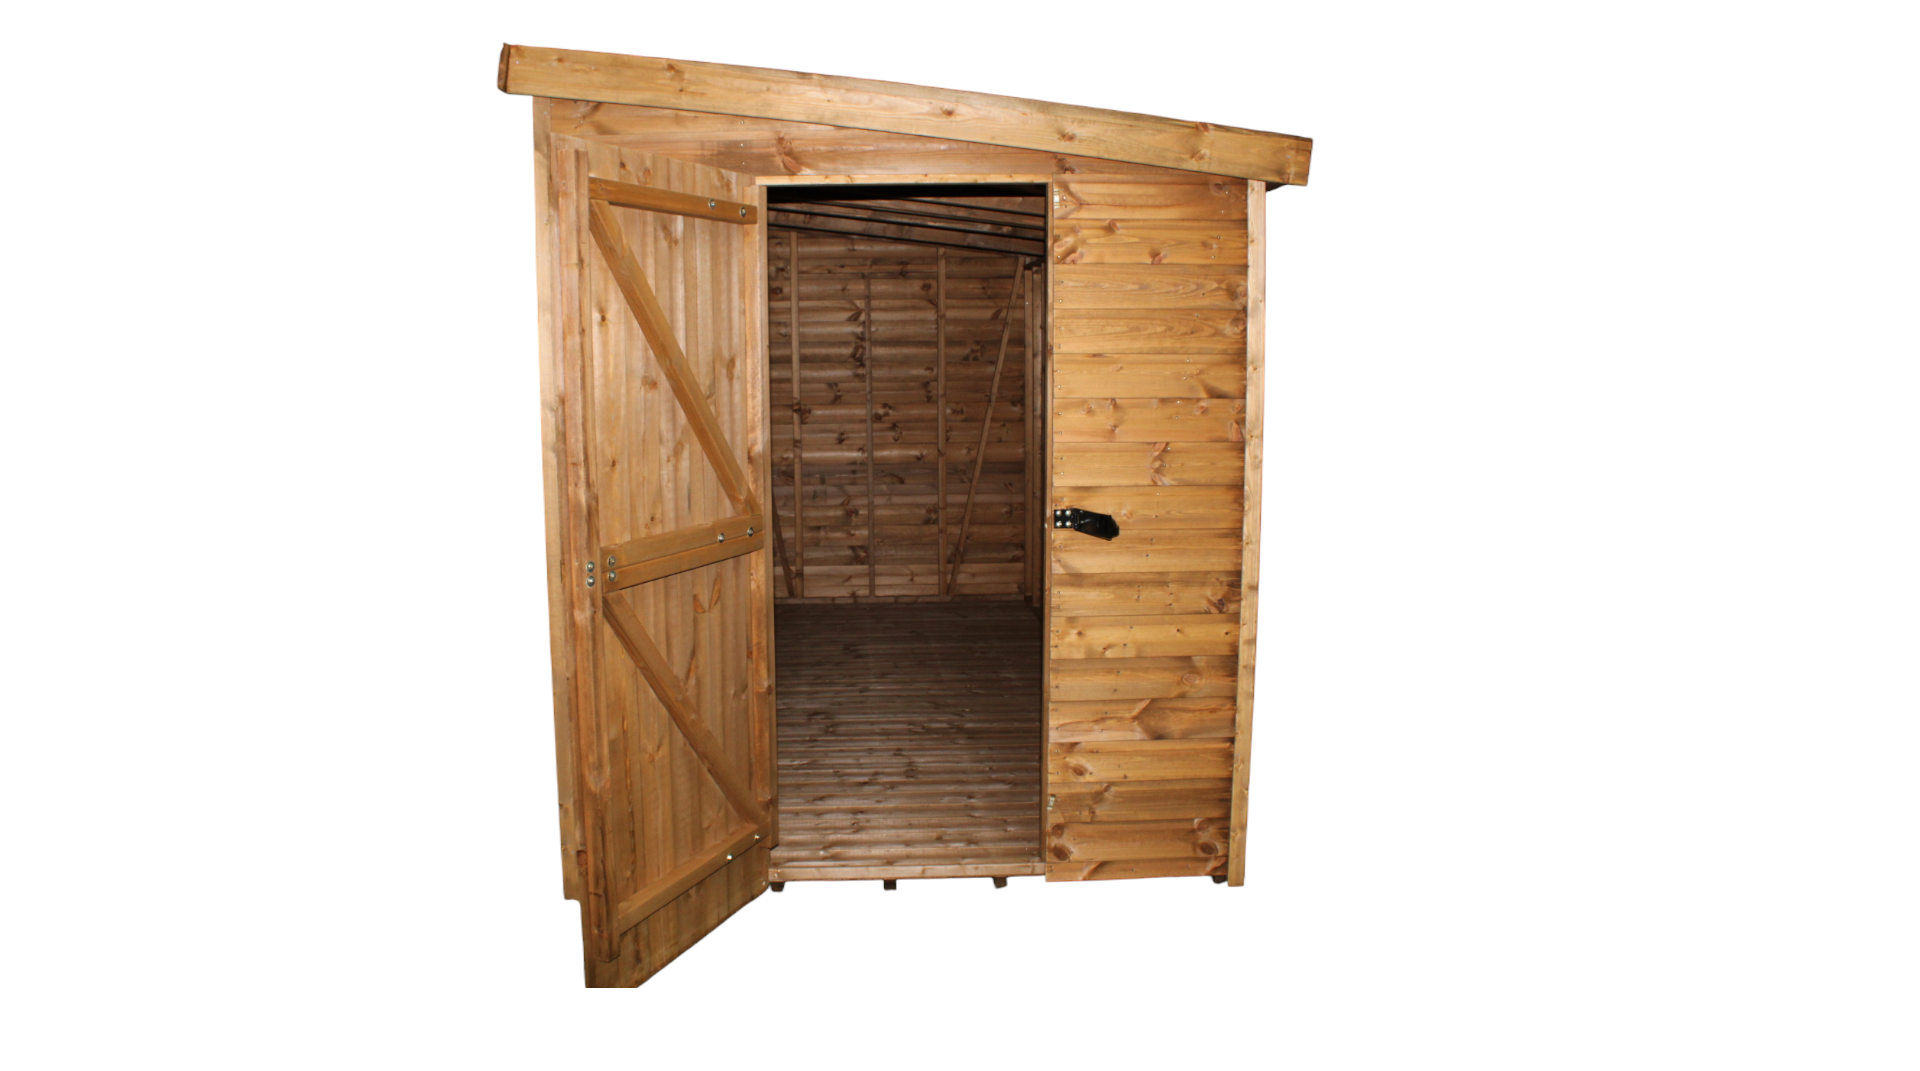 12x6 BRAND NEWc security pent shed, Standard 16mm Nominal Cladding £2,049